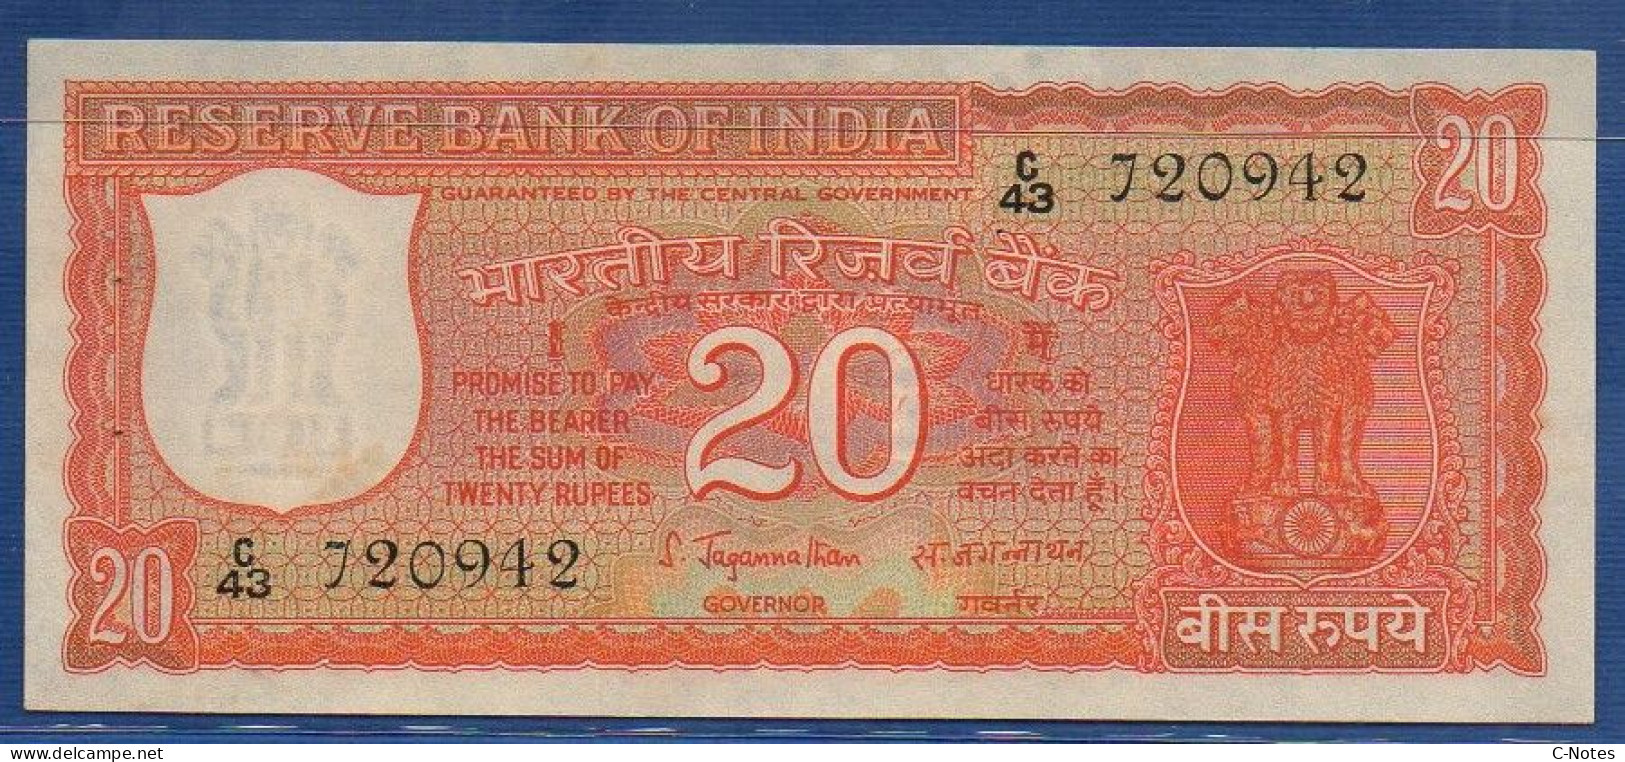 INDIA - P. 61b – 20 Rupees ND, UNC-,  Serie C43 720942 - Blank Space Under Signature - S. Jagannathan (1970) - Indien